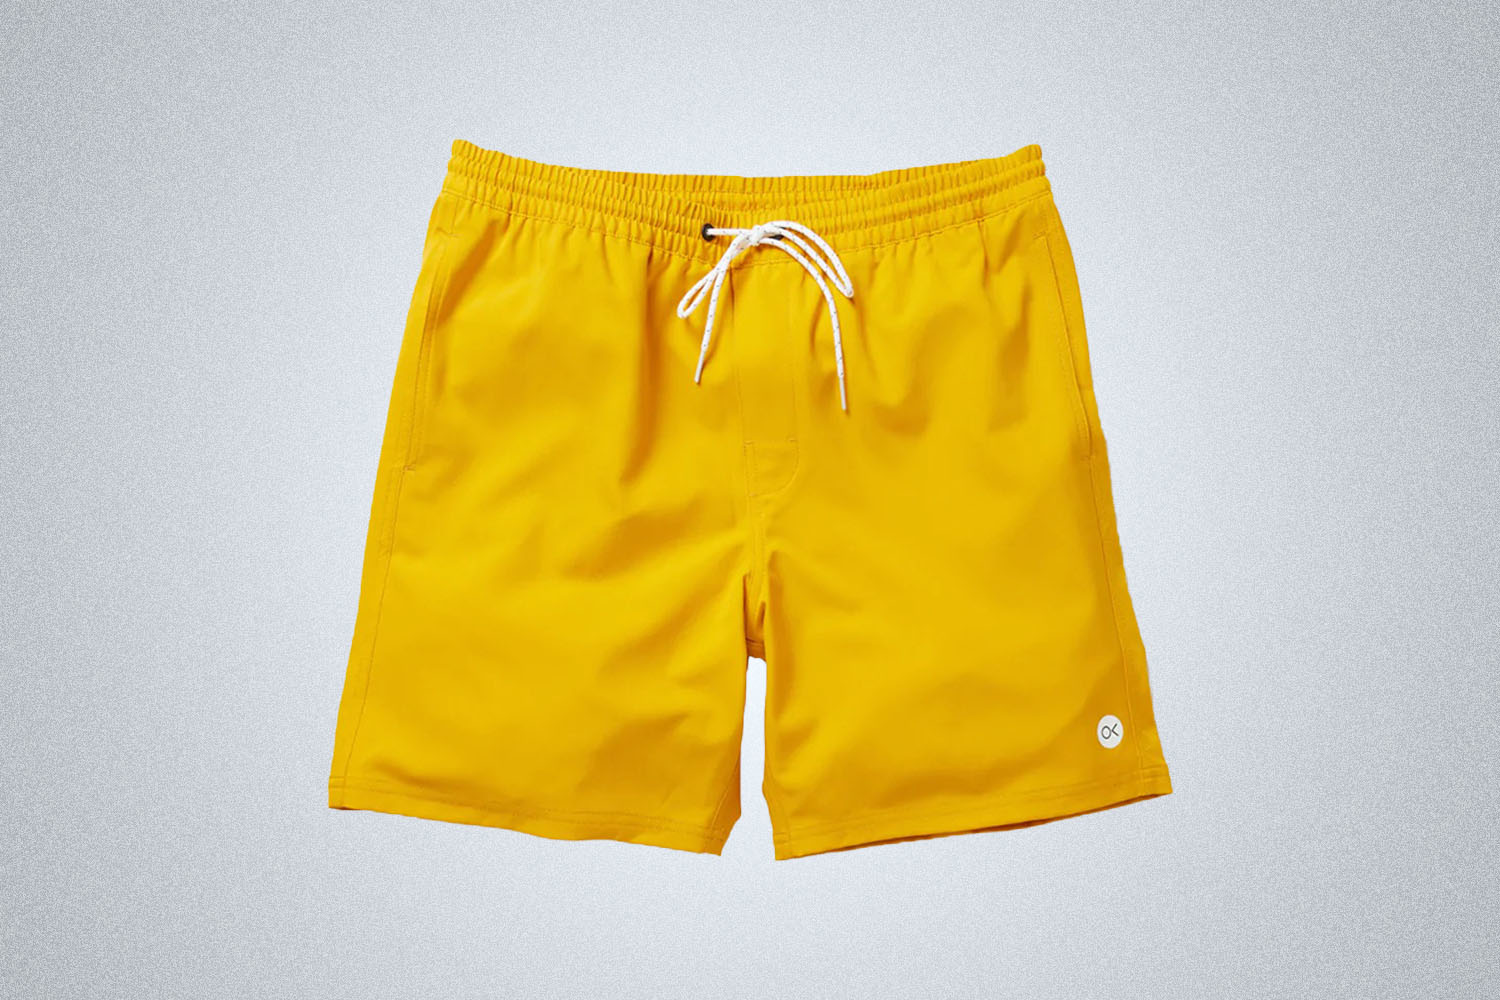 a pair of yellow volley shorts from Outerknown on a grey background